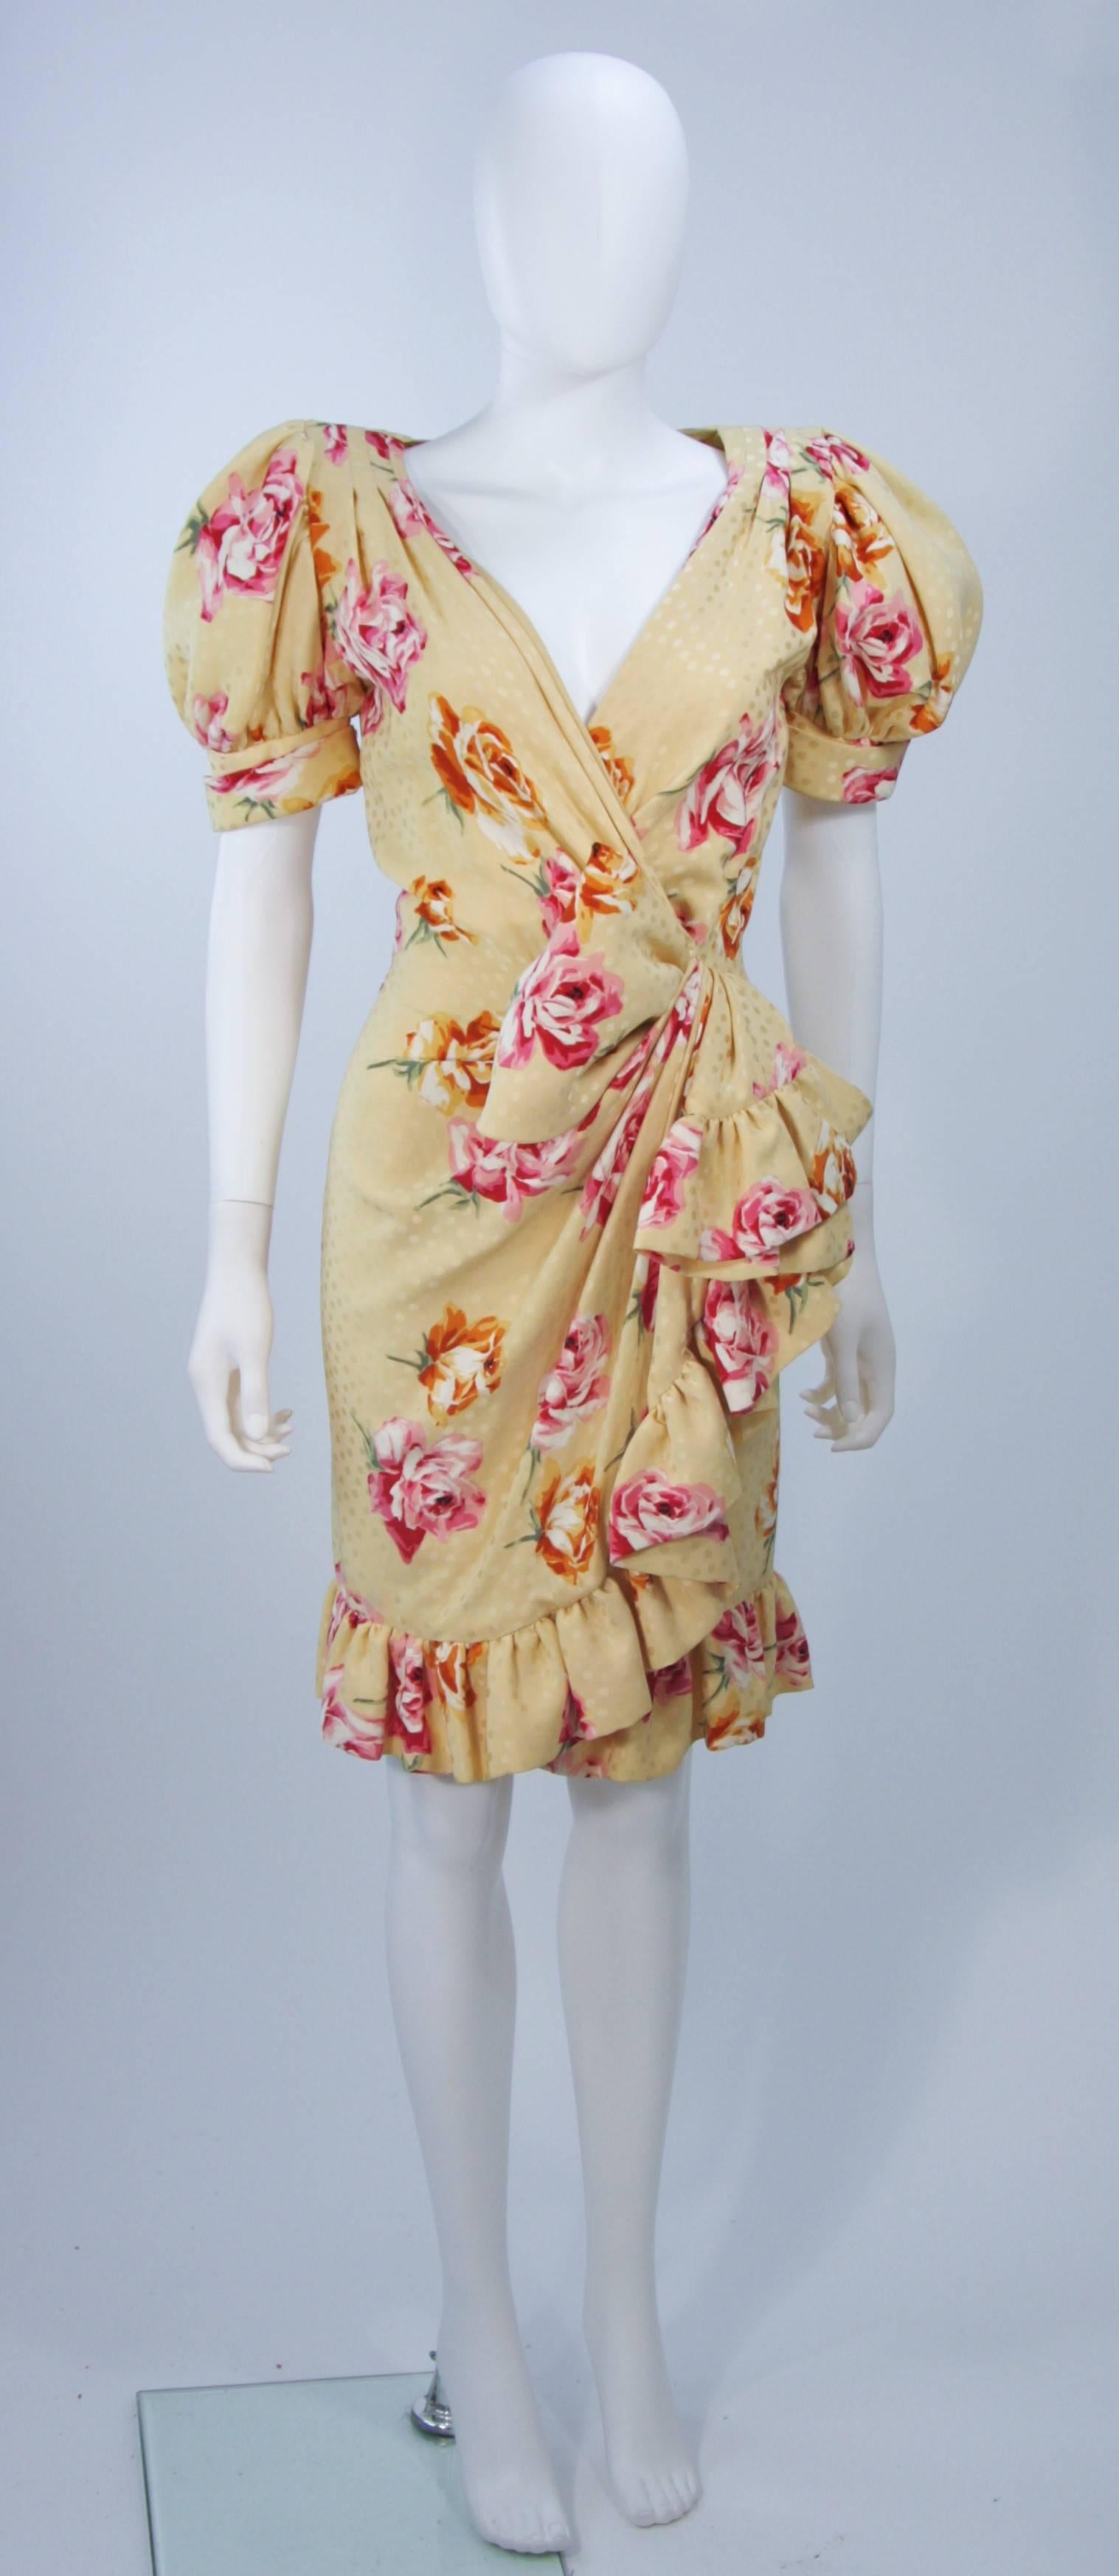  This Andrea Odicini dress is composed of a floral print yellow silk. The drape style design features a ruffled hem, puff sleeves, and a plunging neckline. There is a center back zipper closure. In excellent vintage condition. 

**Please